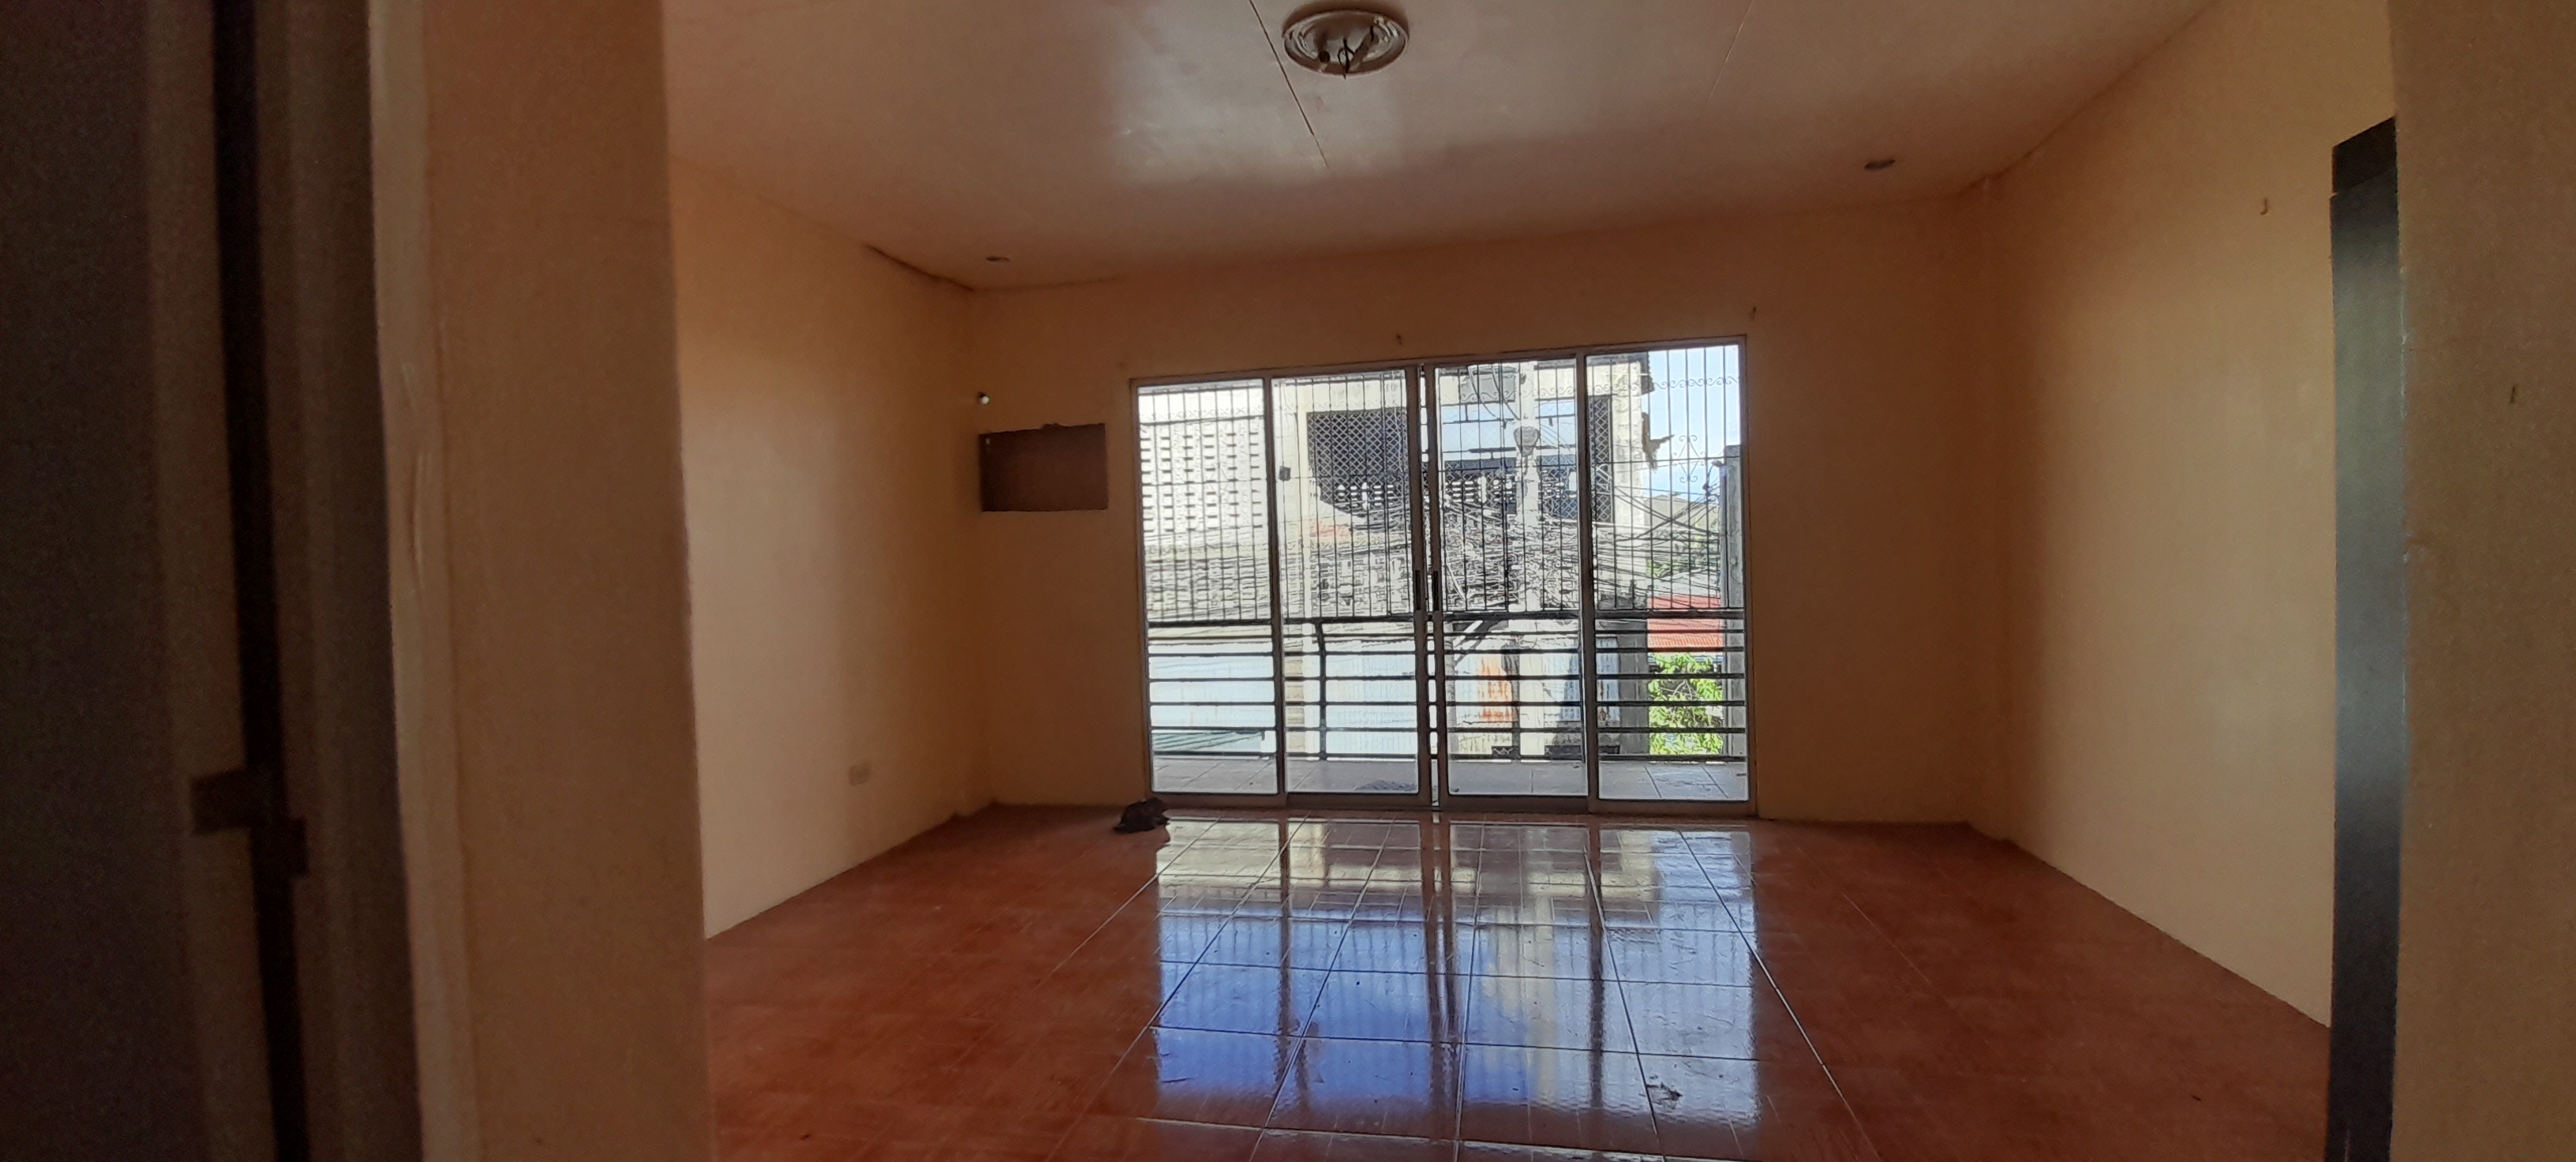 4-bedroom-unfurnished-apartment-can-be-staff-house-or-office-use-in-mandaue-city